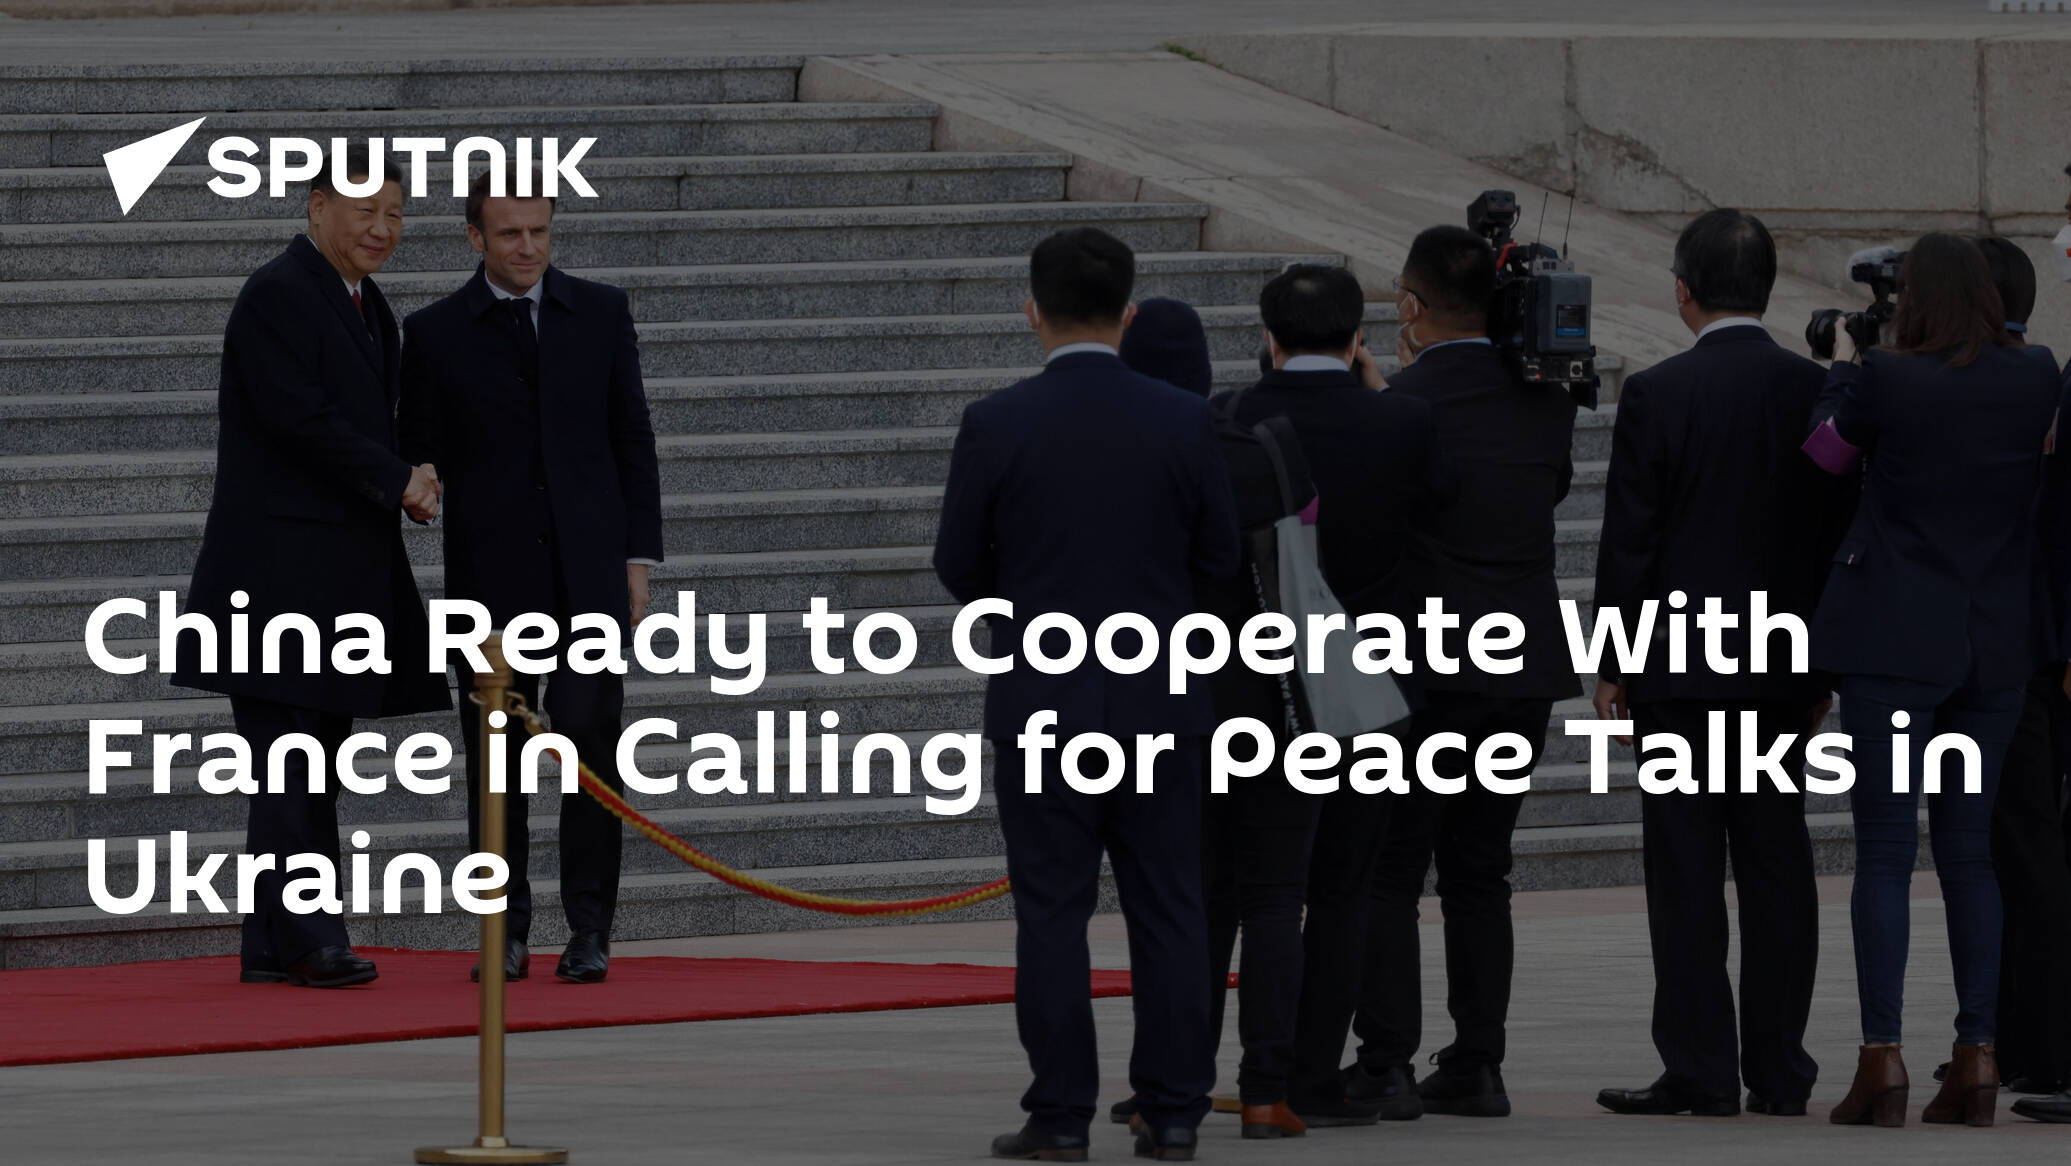 China Ready to Cooperate With France in Calling for Peace Talks in Ukraine